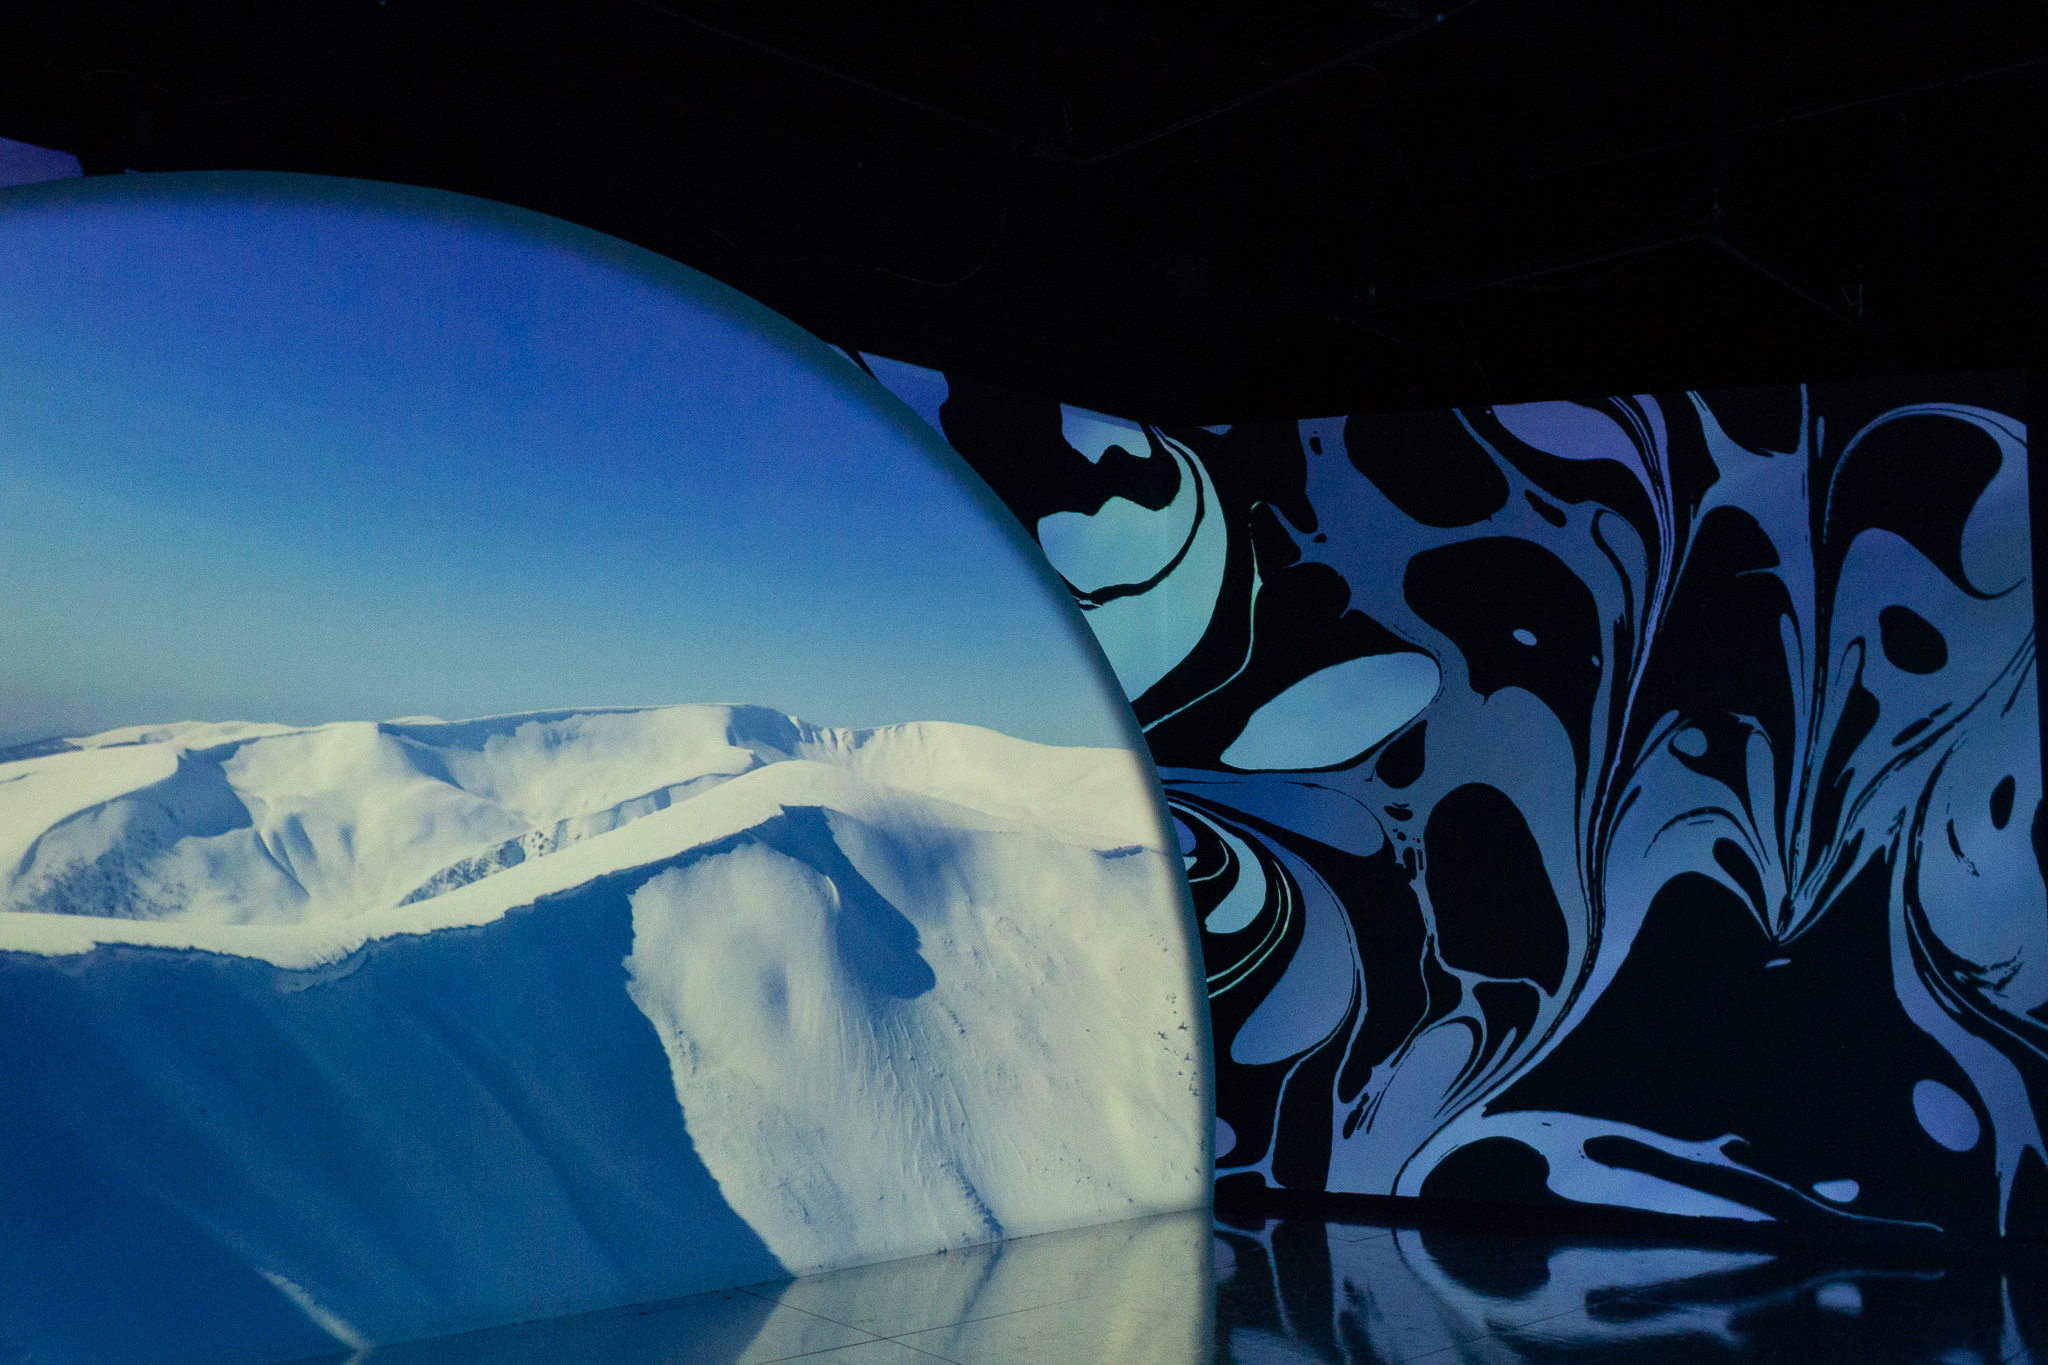 A scene of icebergs projected on a semi-circular screen next to a wall with an abstract blue wave design